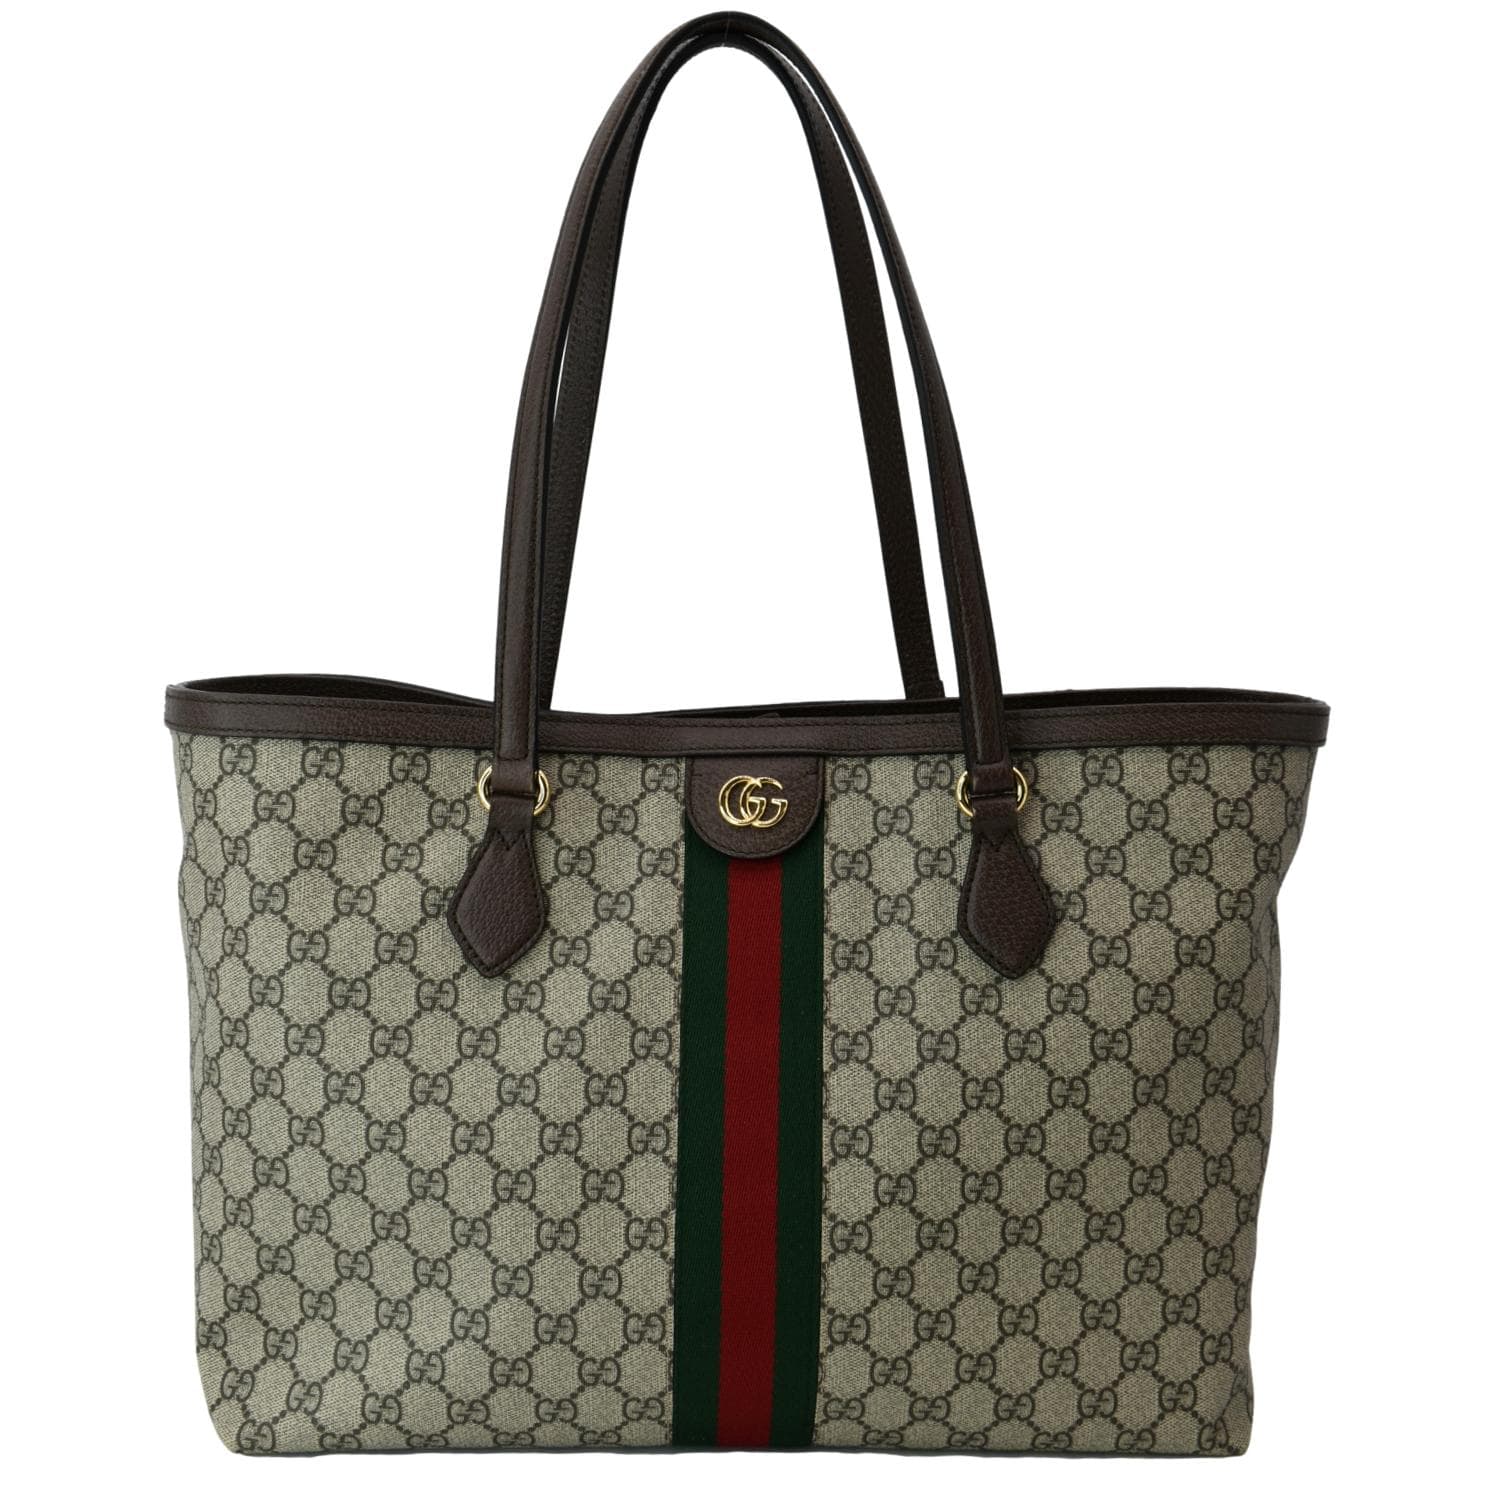 Buy Gucci Ophidia Medium GG Tote 'Beige/White' - 631685 UULAG 9682